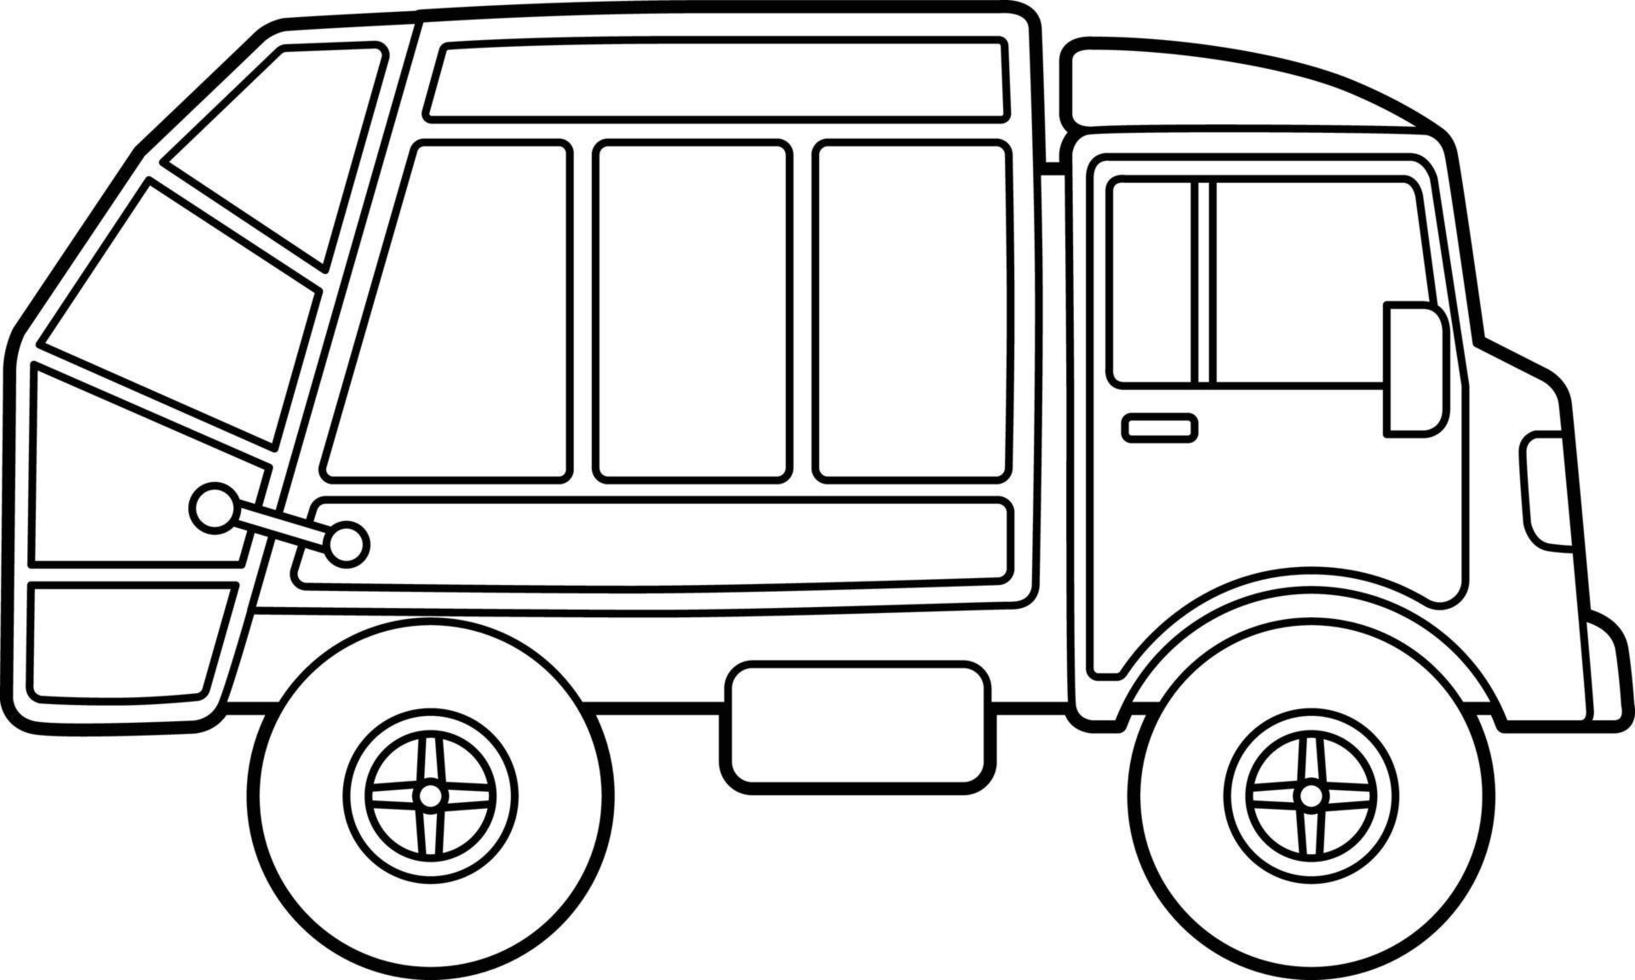 Garbage Truck Coloring Page Isolated for Kids vector